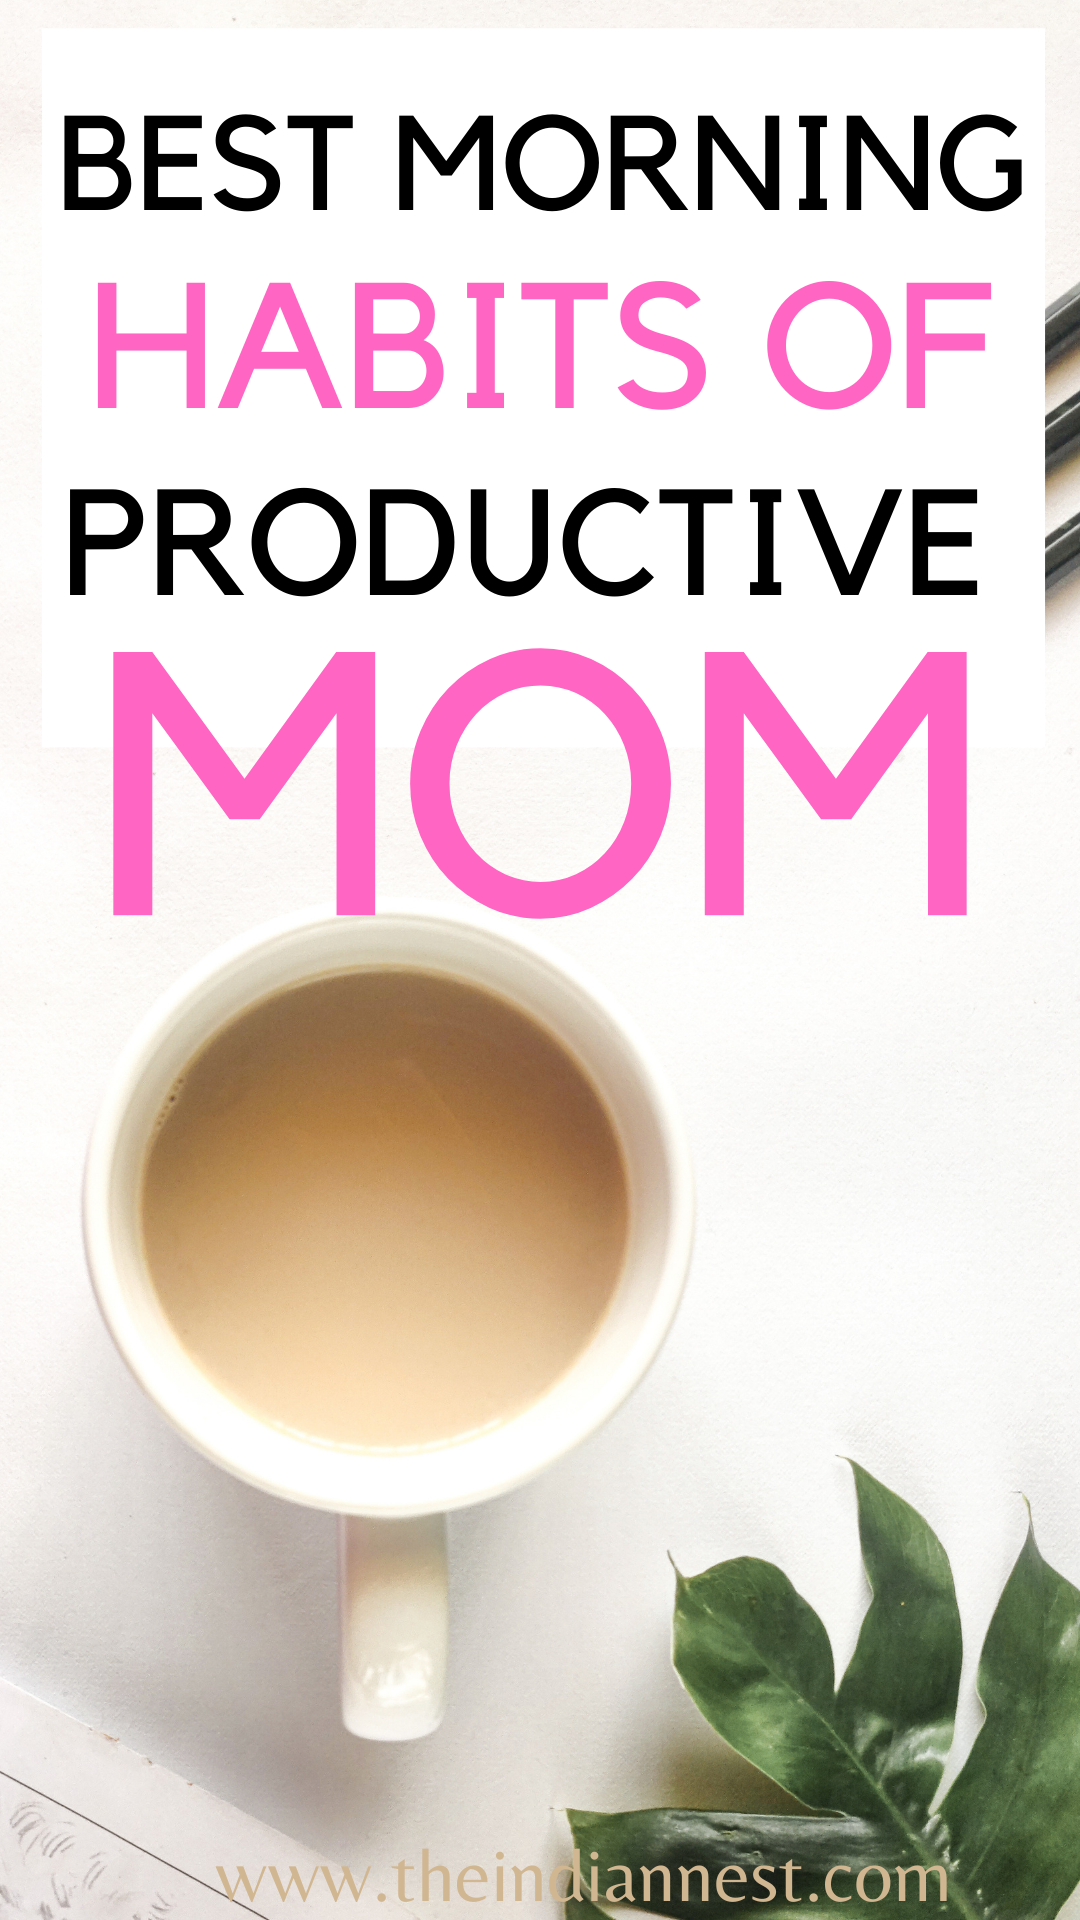 How a stay at home mom can make a morning routine? How to Start the Mom Morning Routine You Need to Be Happy and Productive. Mom morning habits and routines are so important to set the tone for the day.  